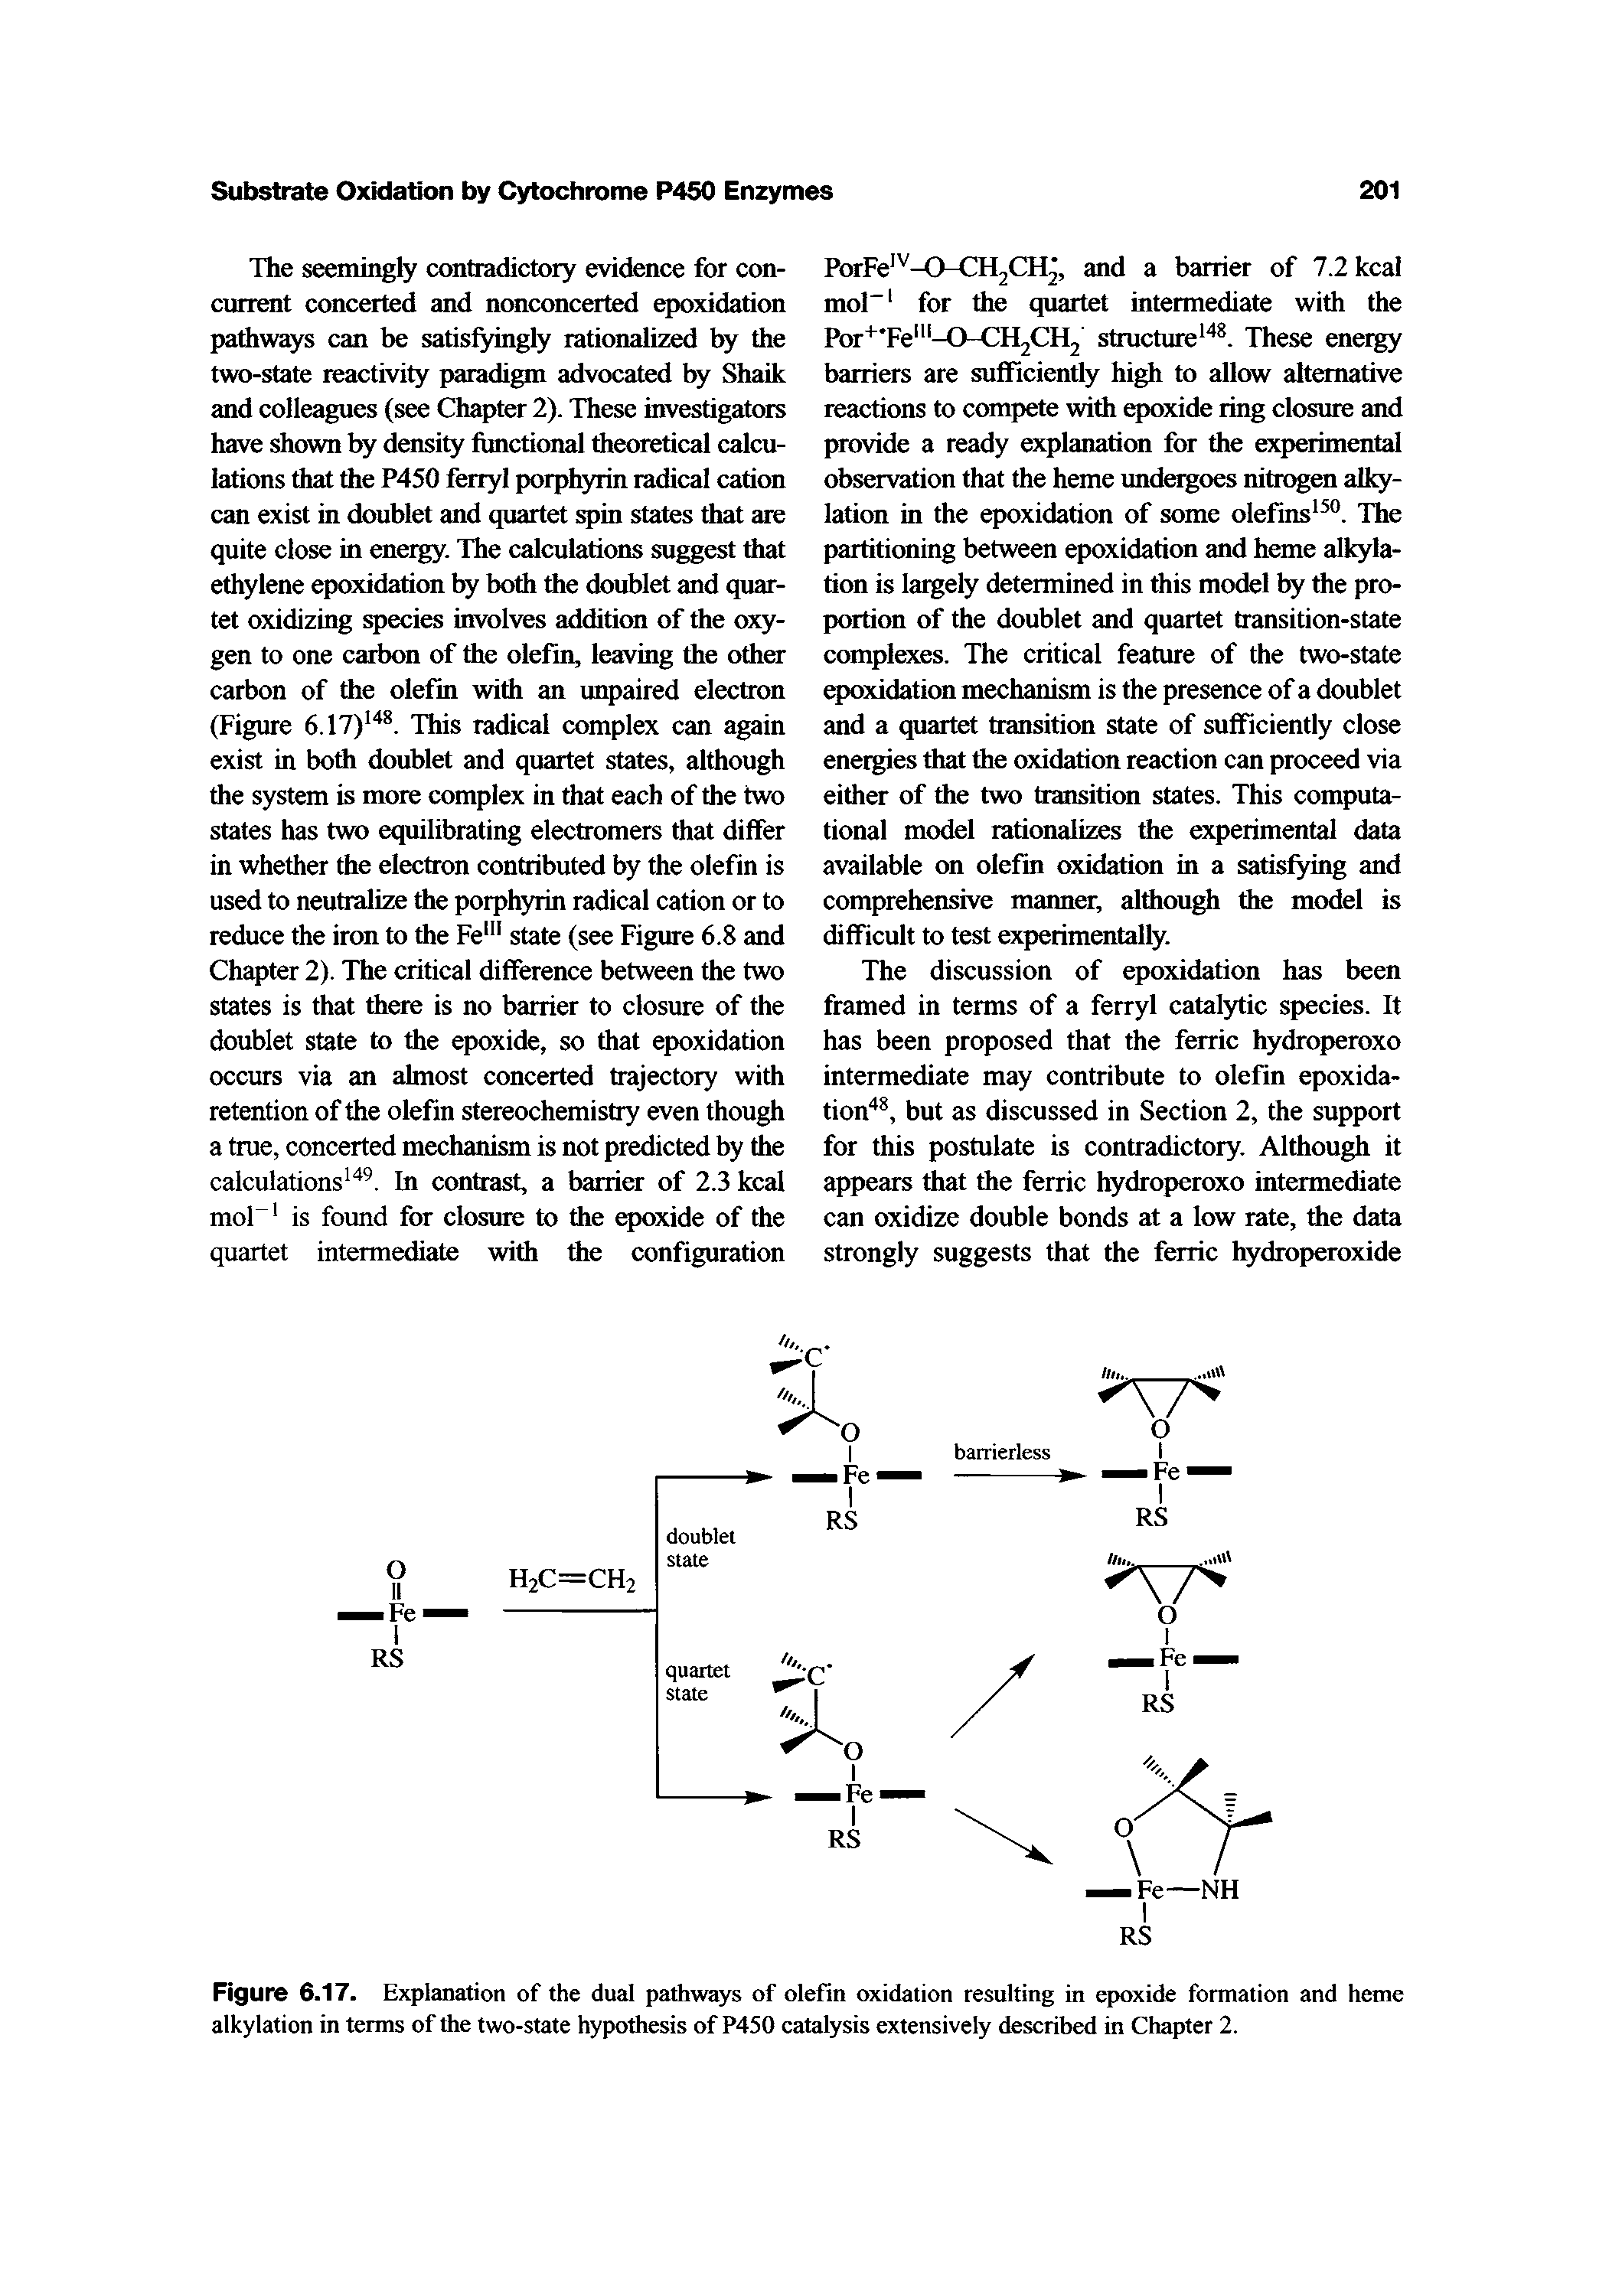 Figure 6.17. Explanation of the dual pathways of olefin oxidation resulting in epoxide formation and heme alkylation in terms of the two-state hypothesis of P450 catalysis extensively described in Chapter 2.